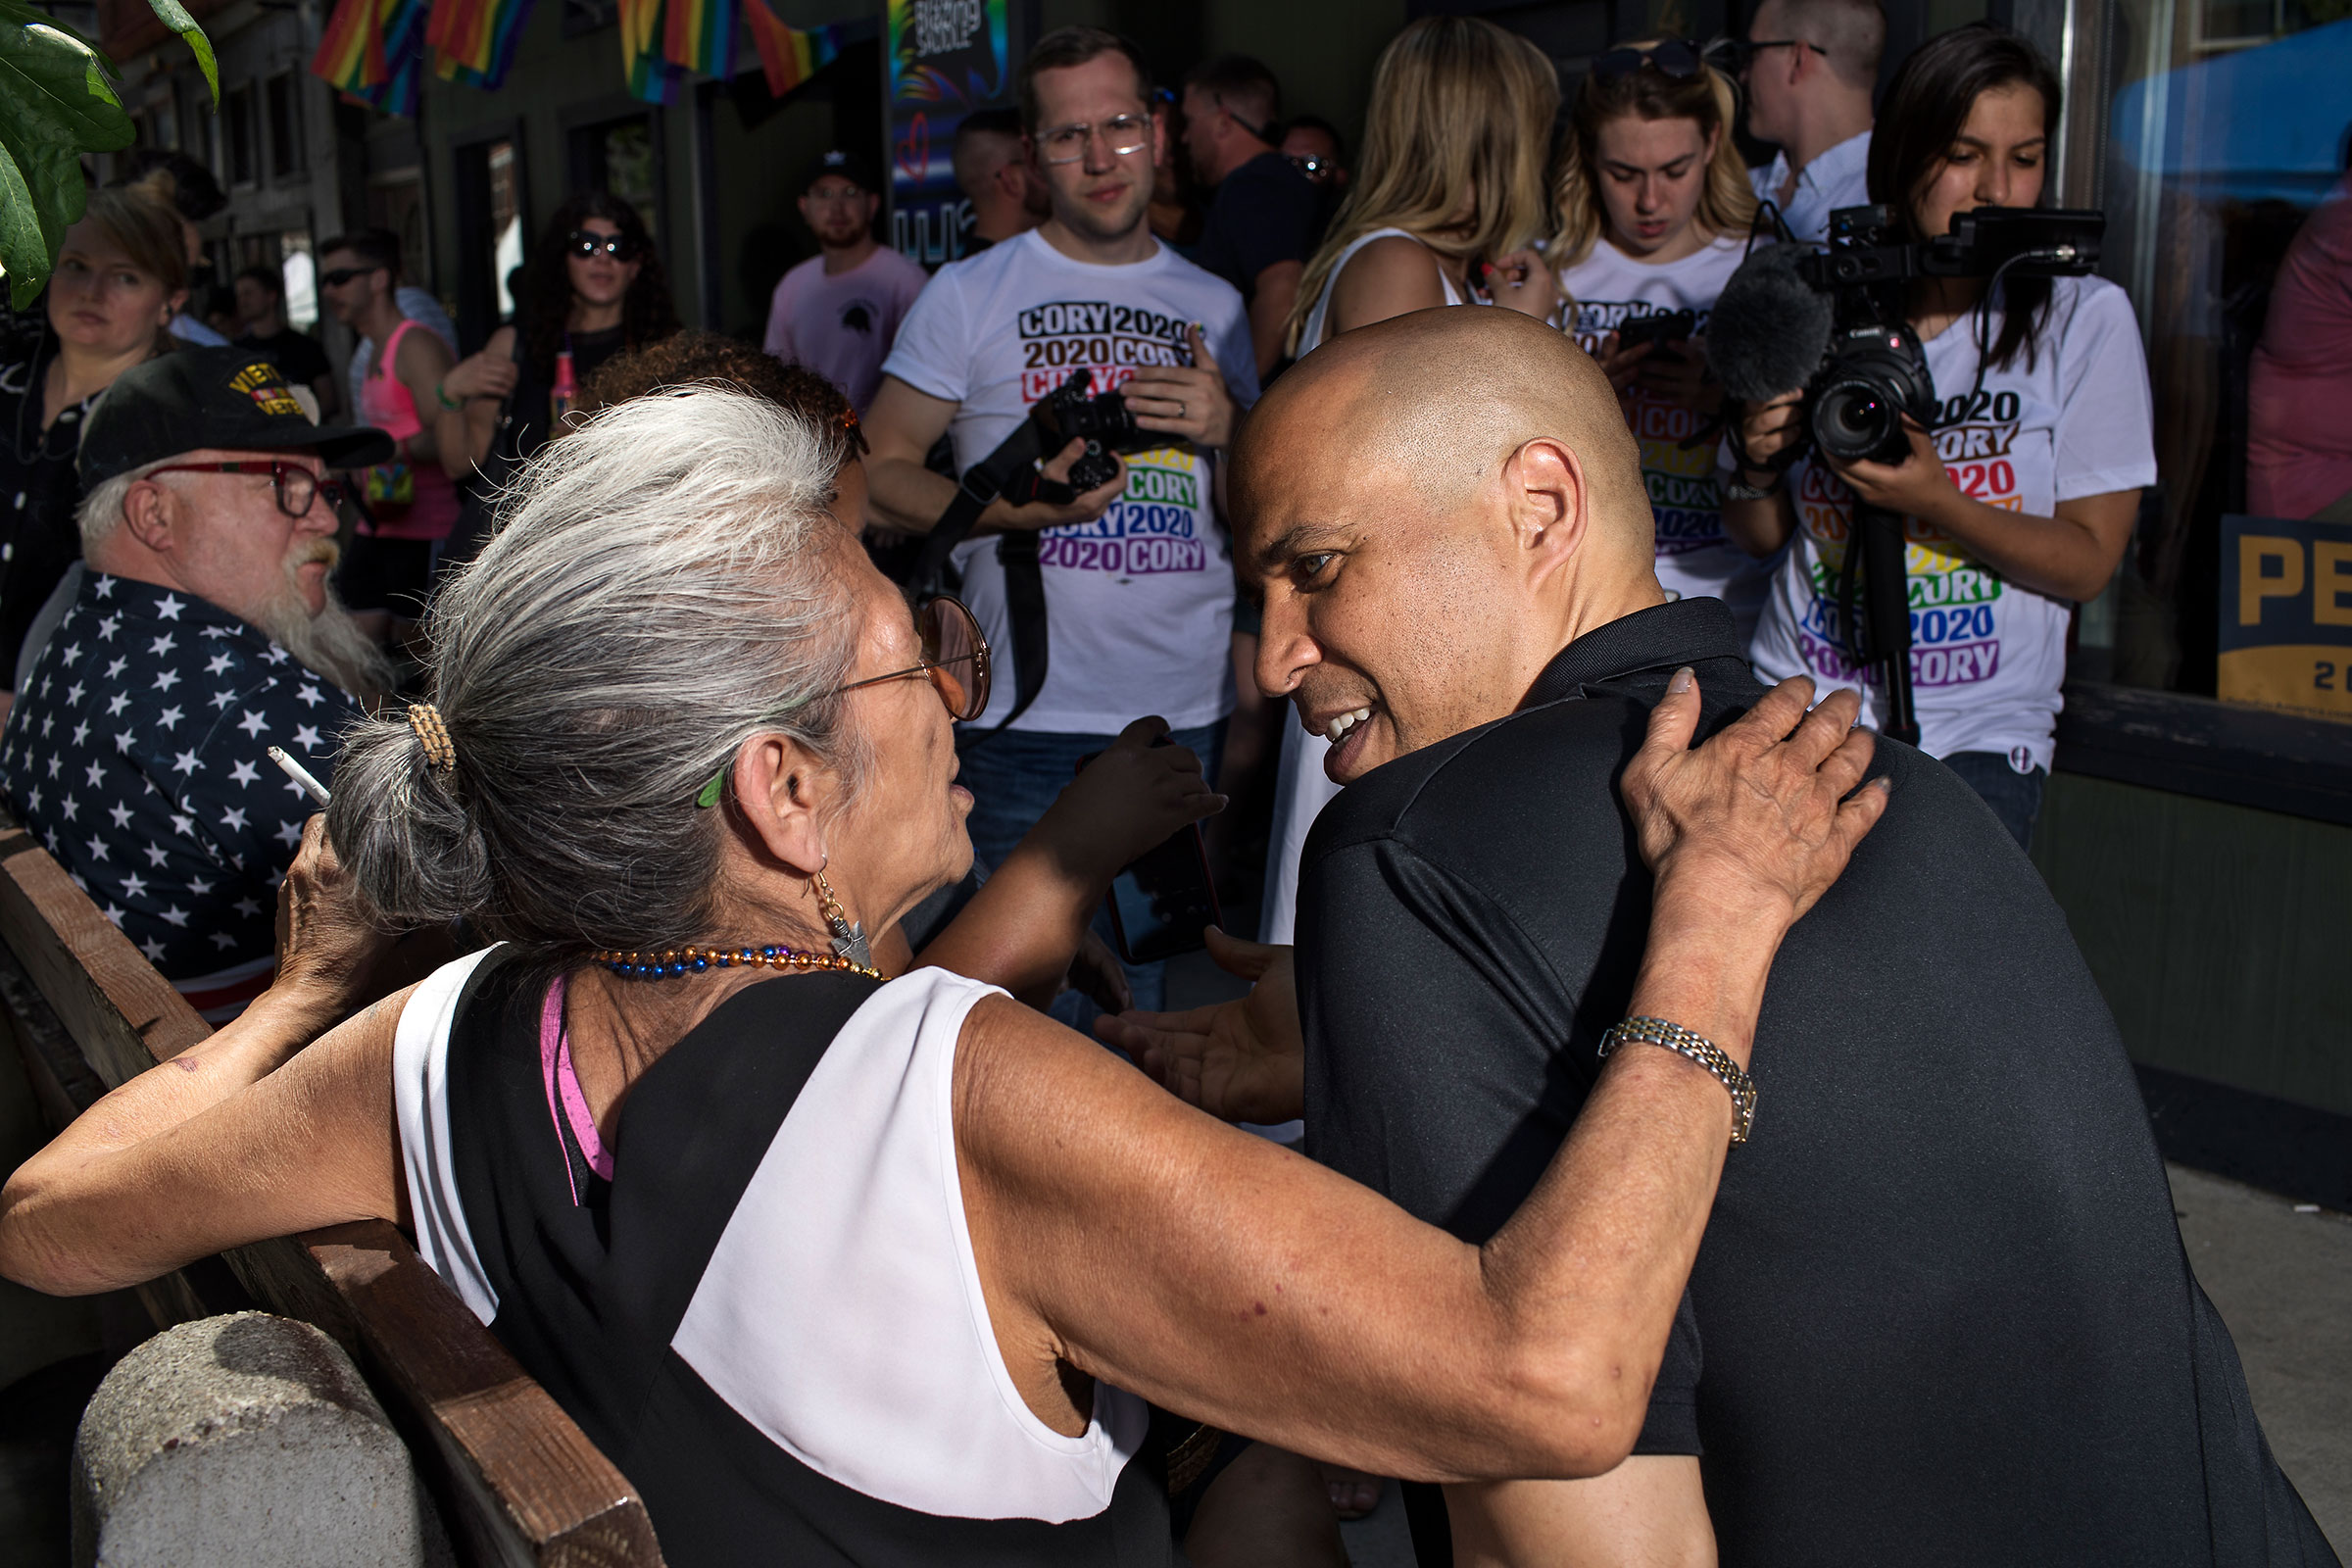 Booker speaks with a community member in Des Moines' East Village neighborhood during the Capital City Pride Festival on June 8. (Danny Wilcox Frazier—VII for TIME)